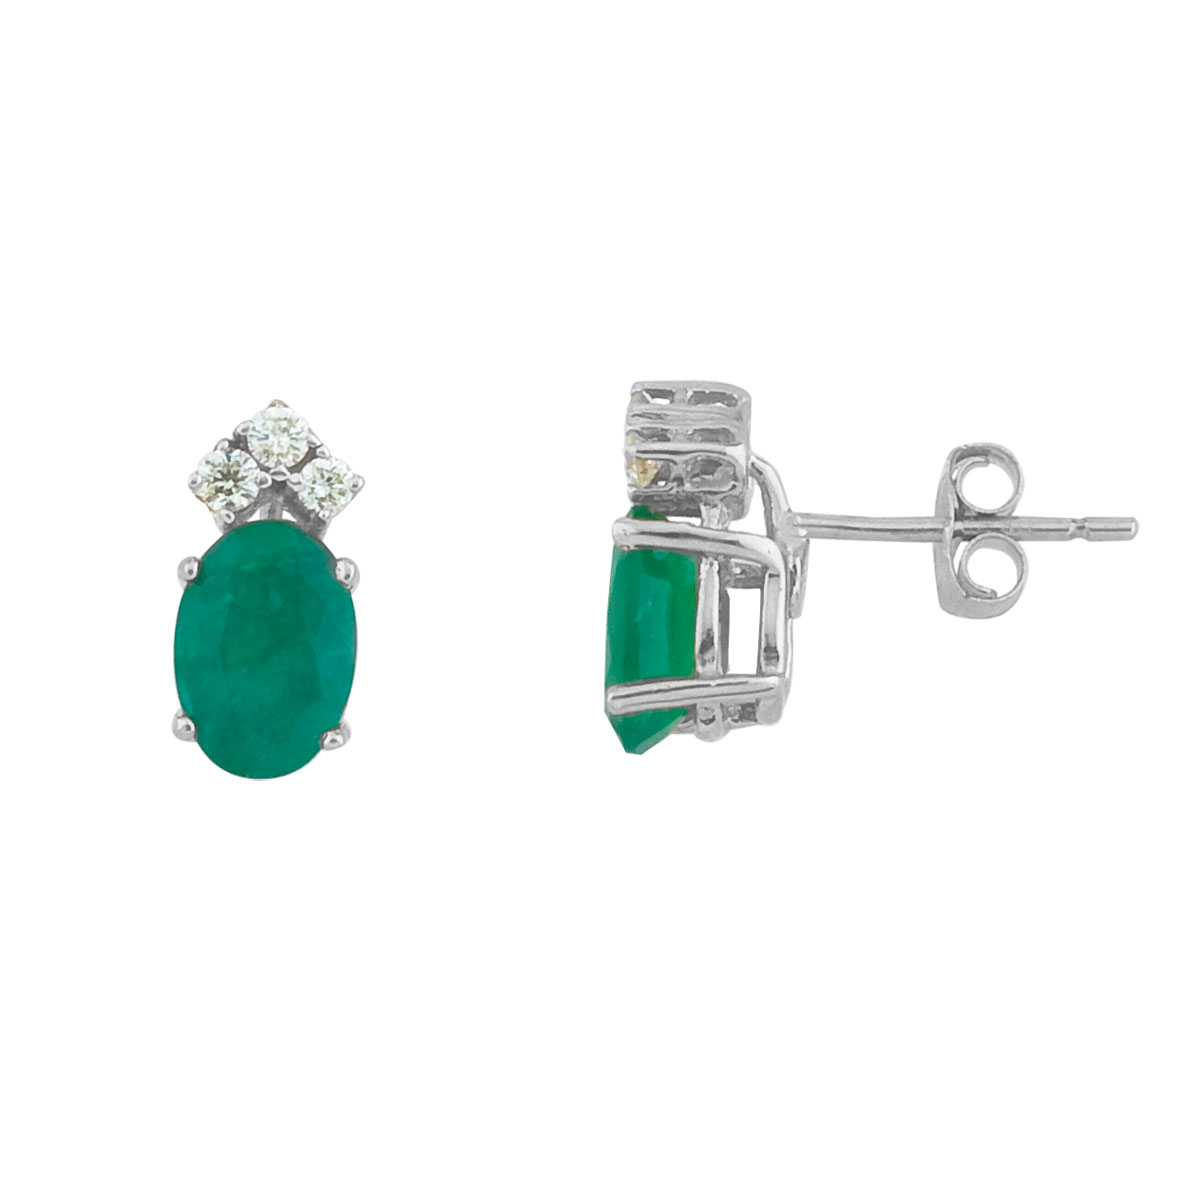 These 7x5 mm oval shaped emerald earrings are set in beautiful 14k white  gold and feature .12 total carat diamonds.